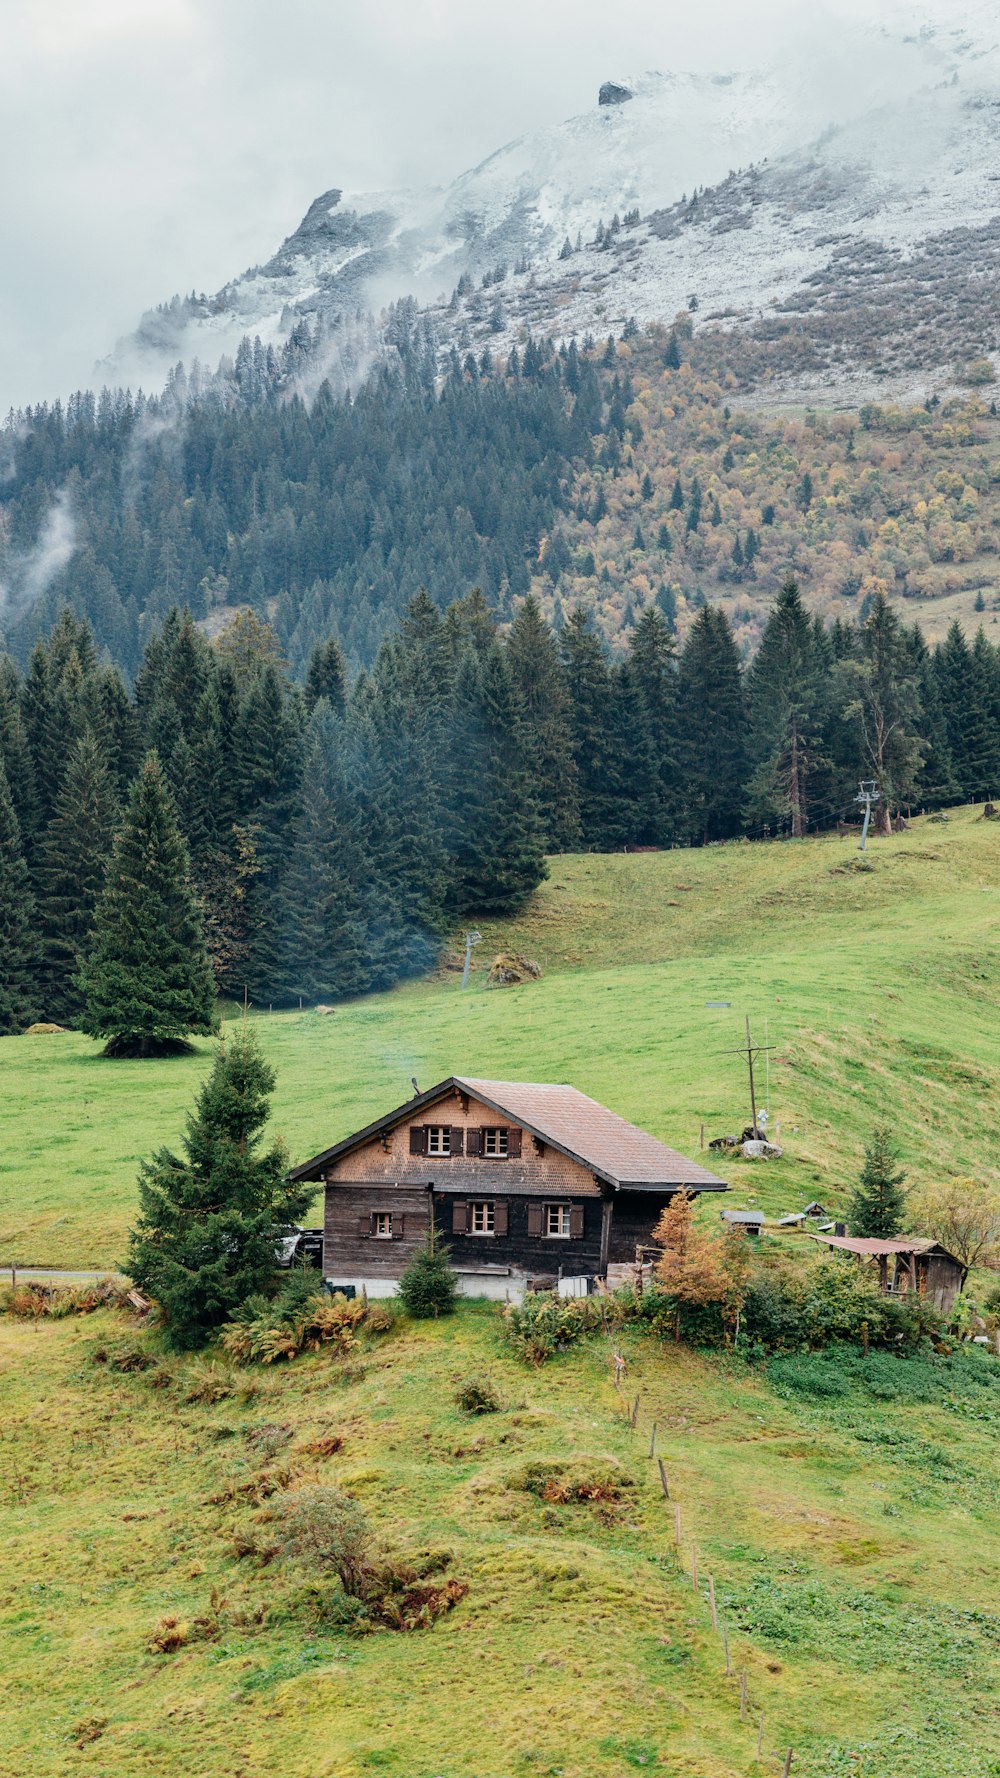 a house in the middle of a field with a mountain in the background